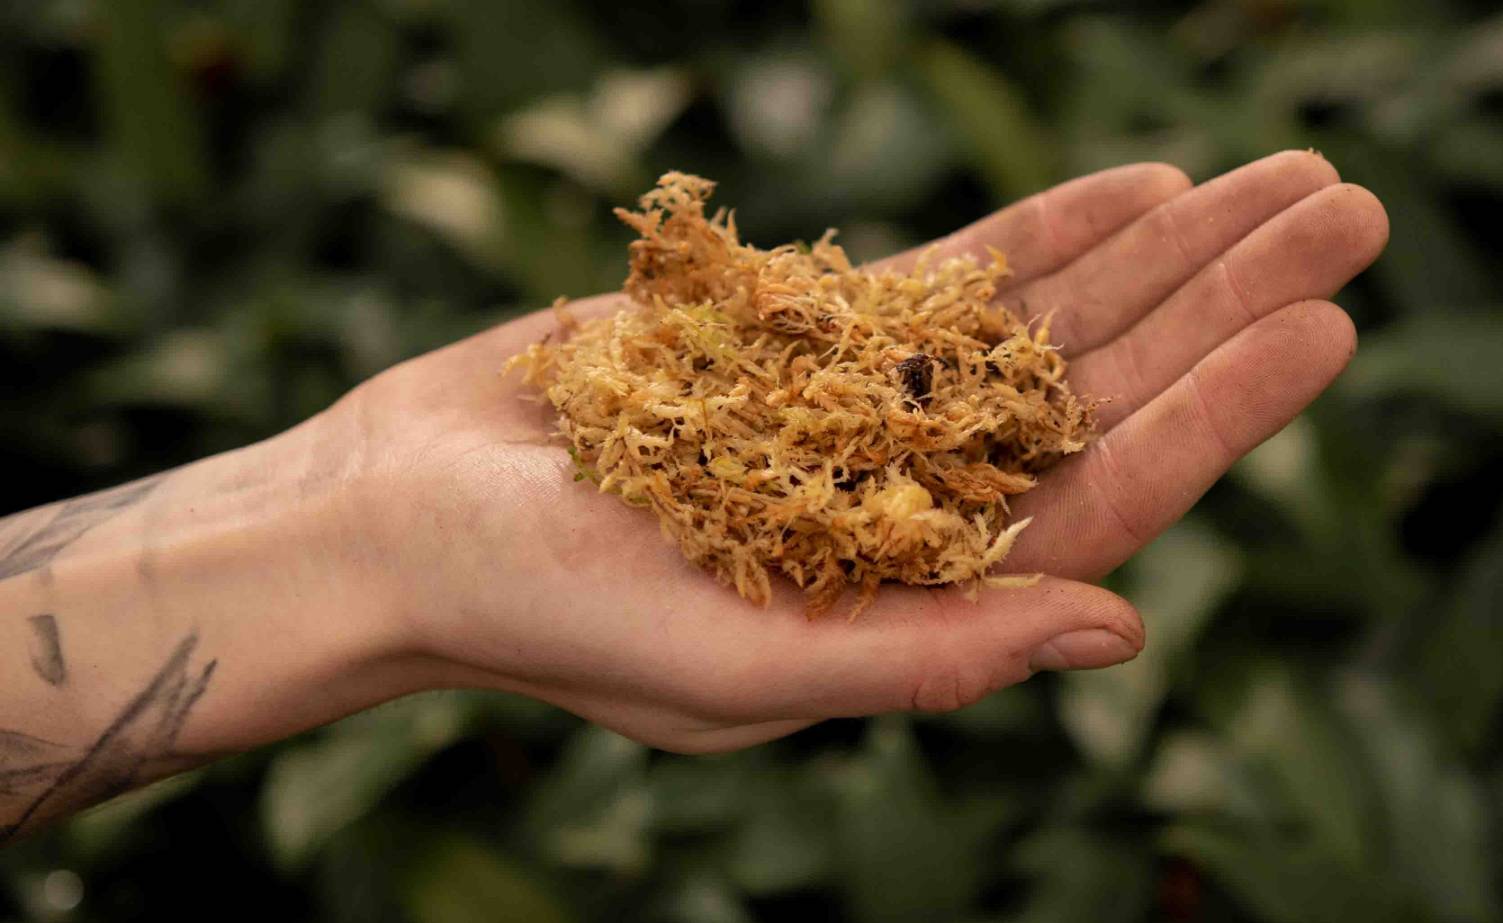 Sphagnum moss in a hand